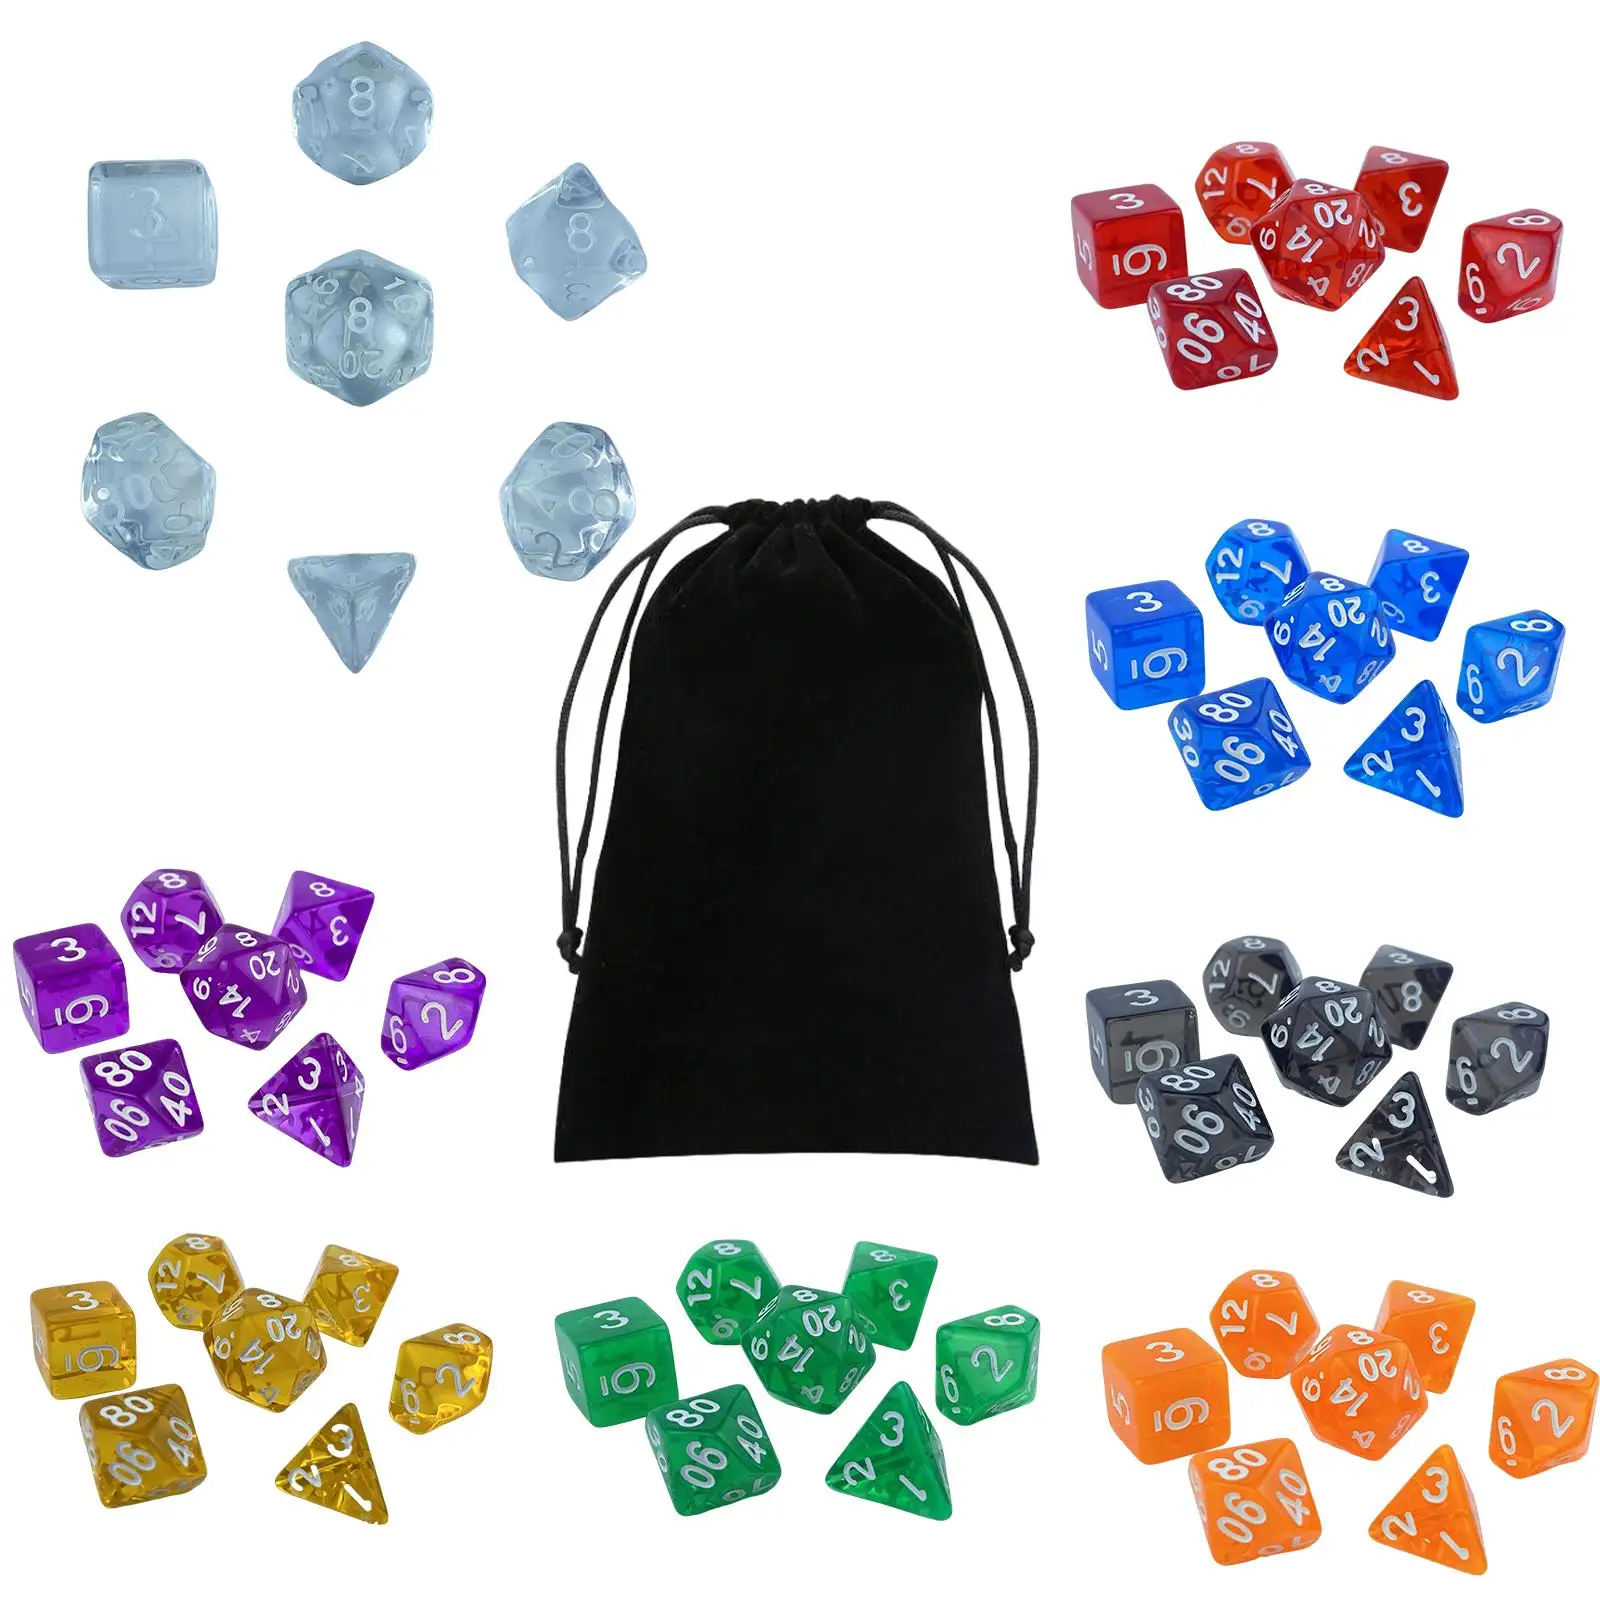 56Pcs Polyhedral Dice Game Dices for Role Play Party Favors Drinking Props